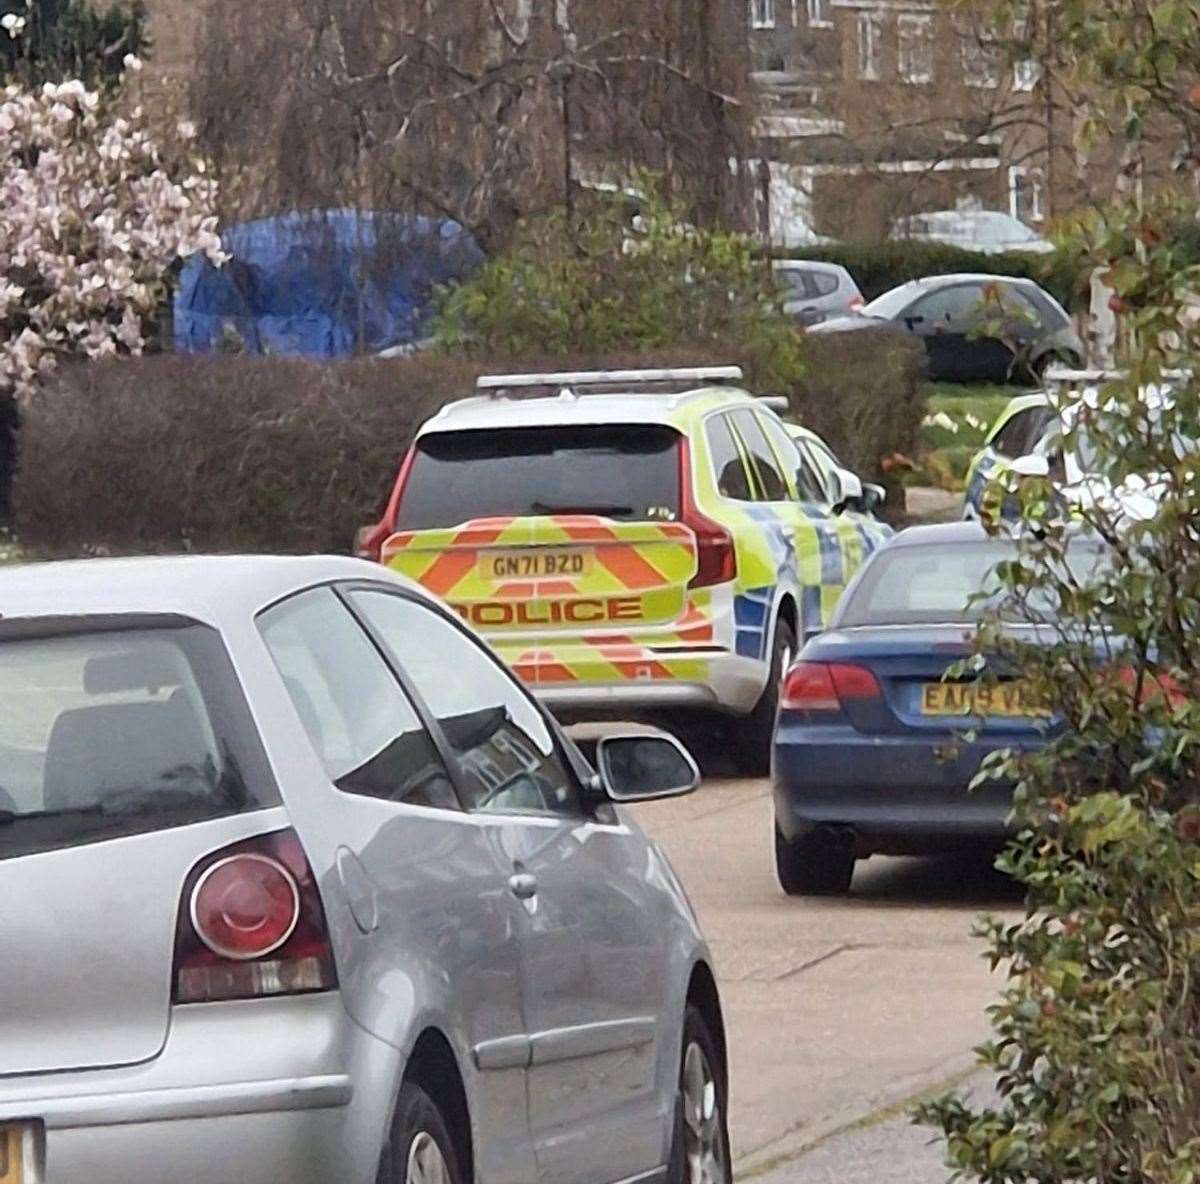 Police in Forgefields, Herne Bay, where a man was arrested on suspicion of assault and drug driving